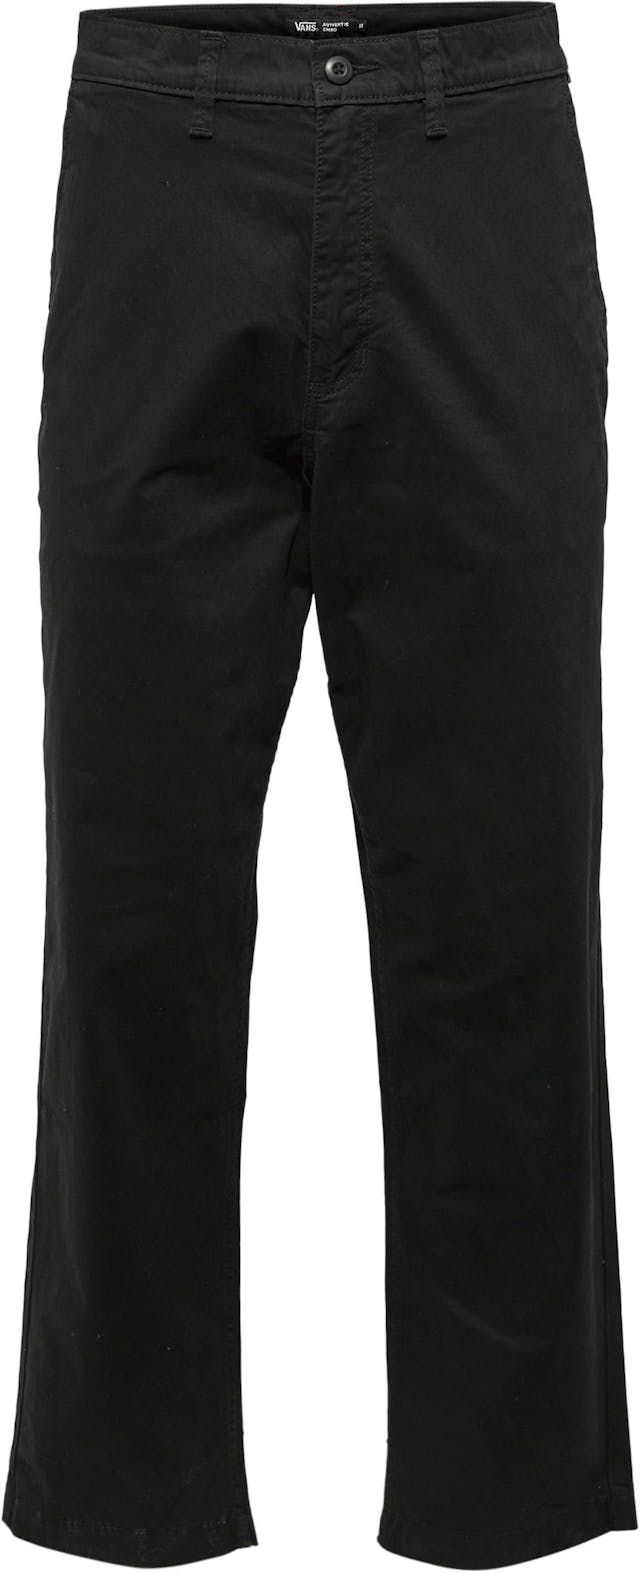 Product image for Authentic Chino Loose Tapered Pants - Men's